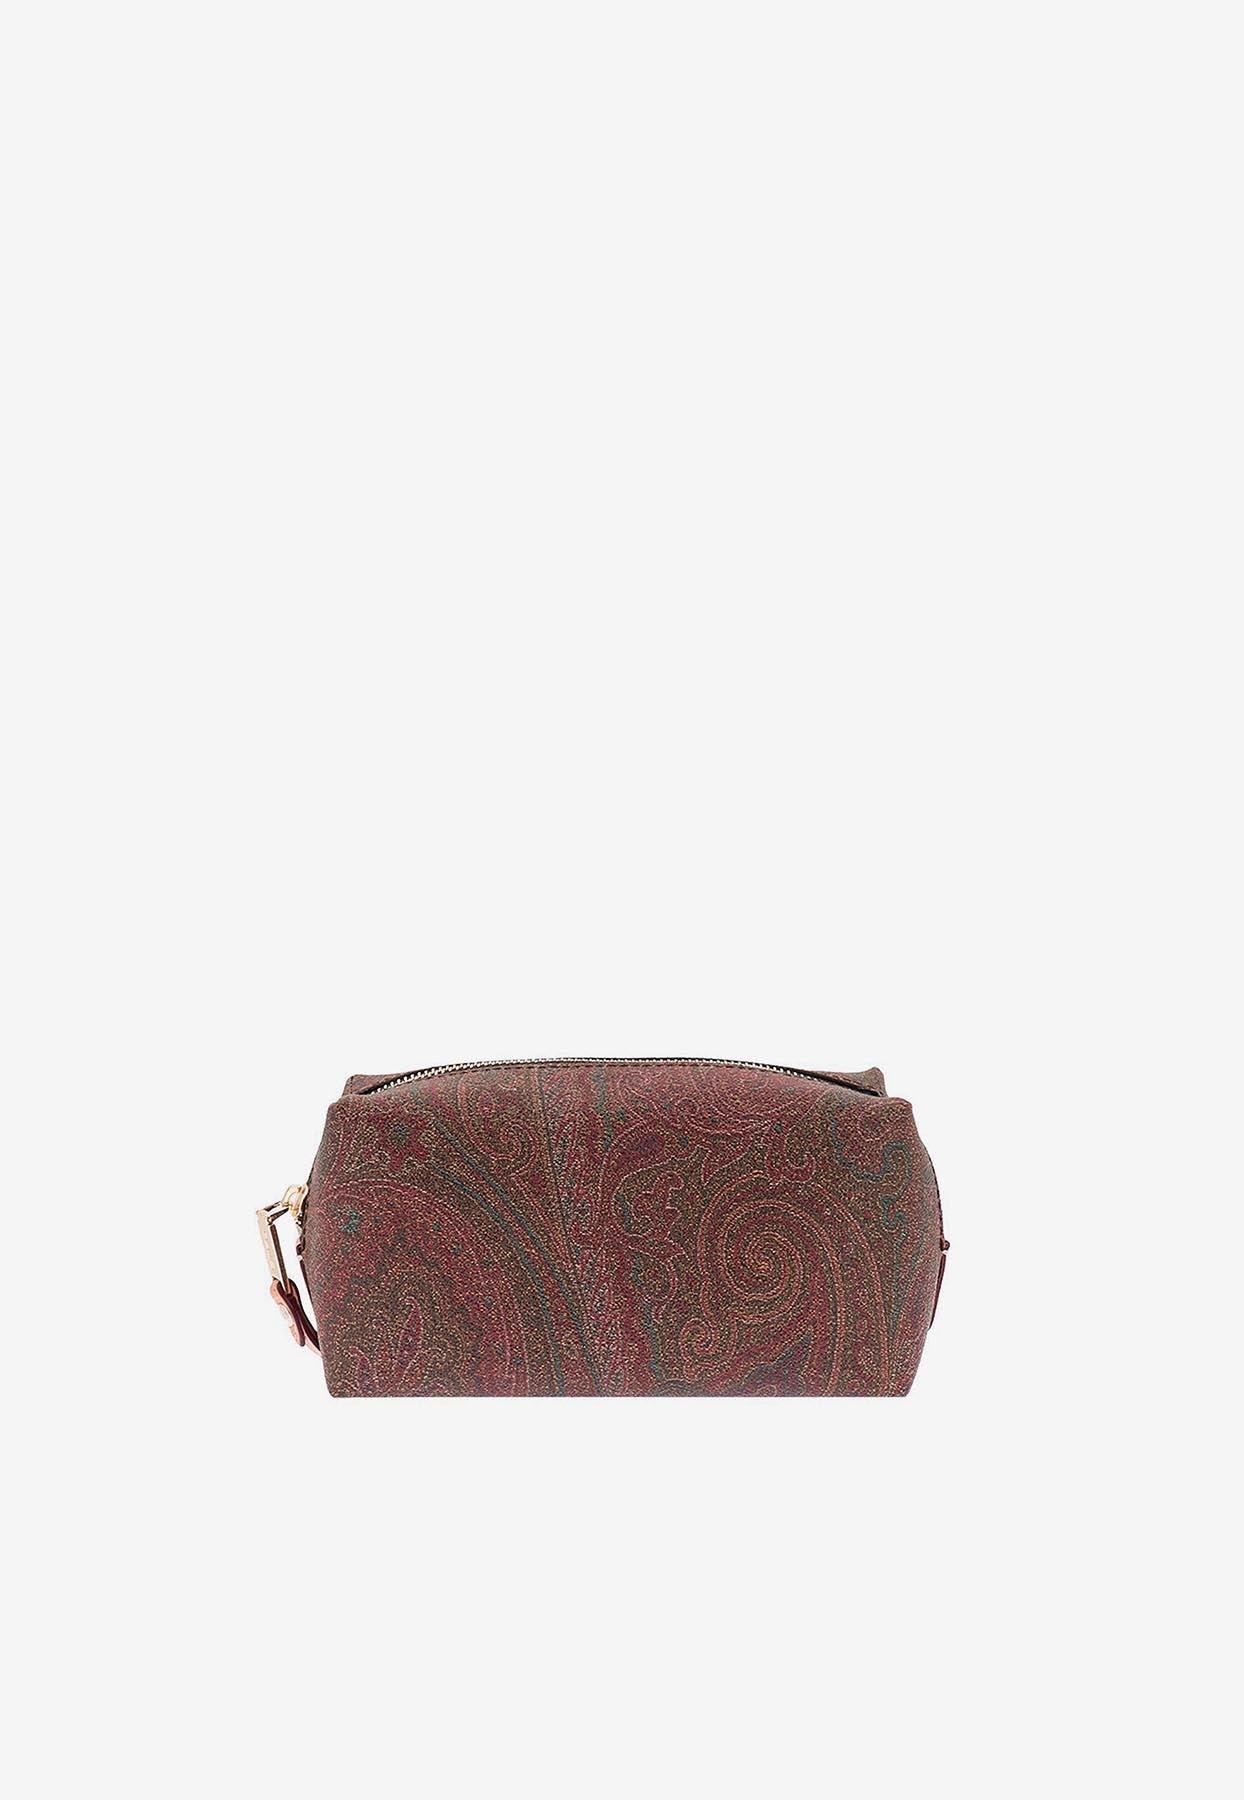 ETRO Milano Paisley Collection Leather Trimmed Clutch 